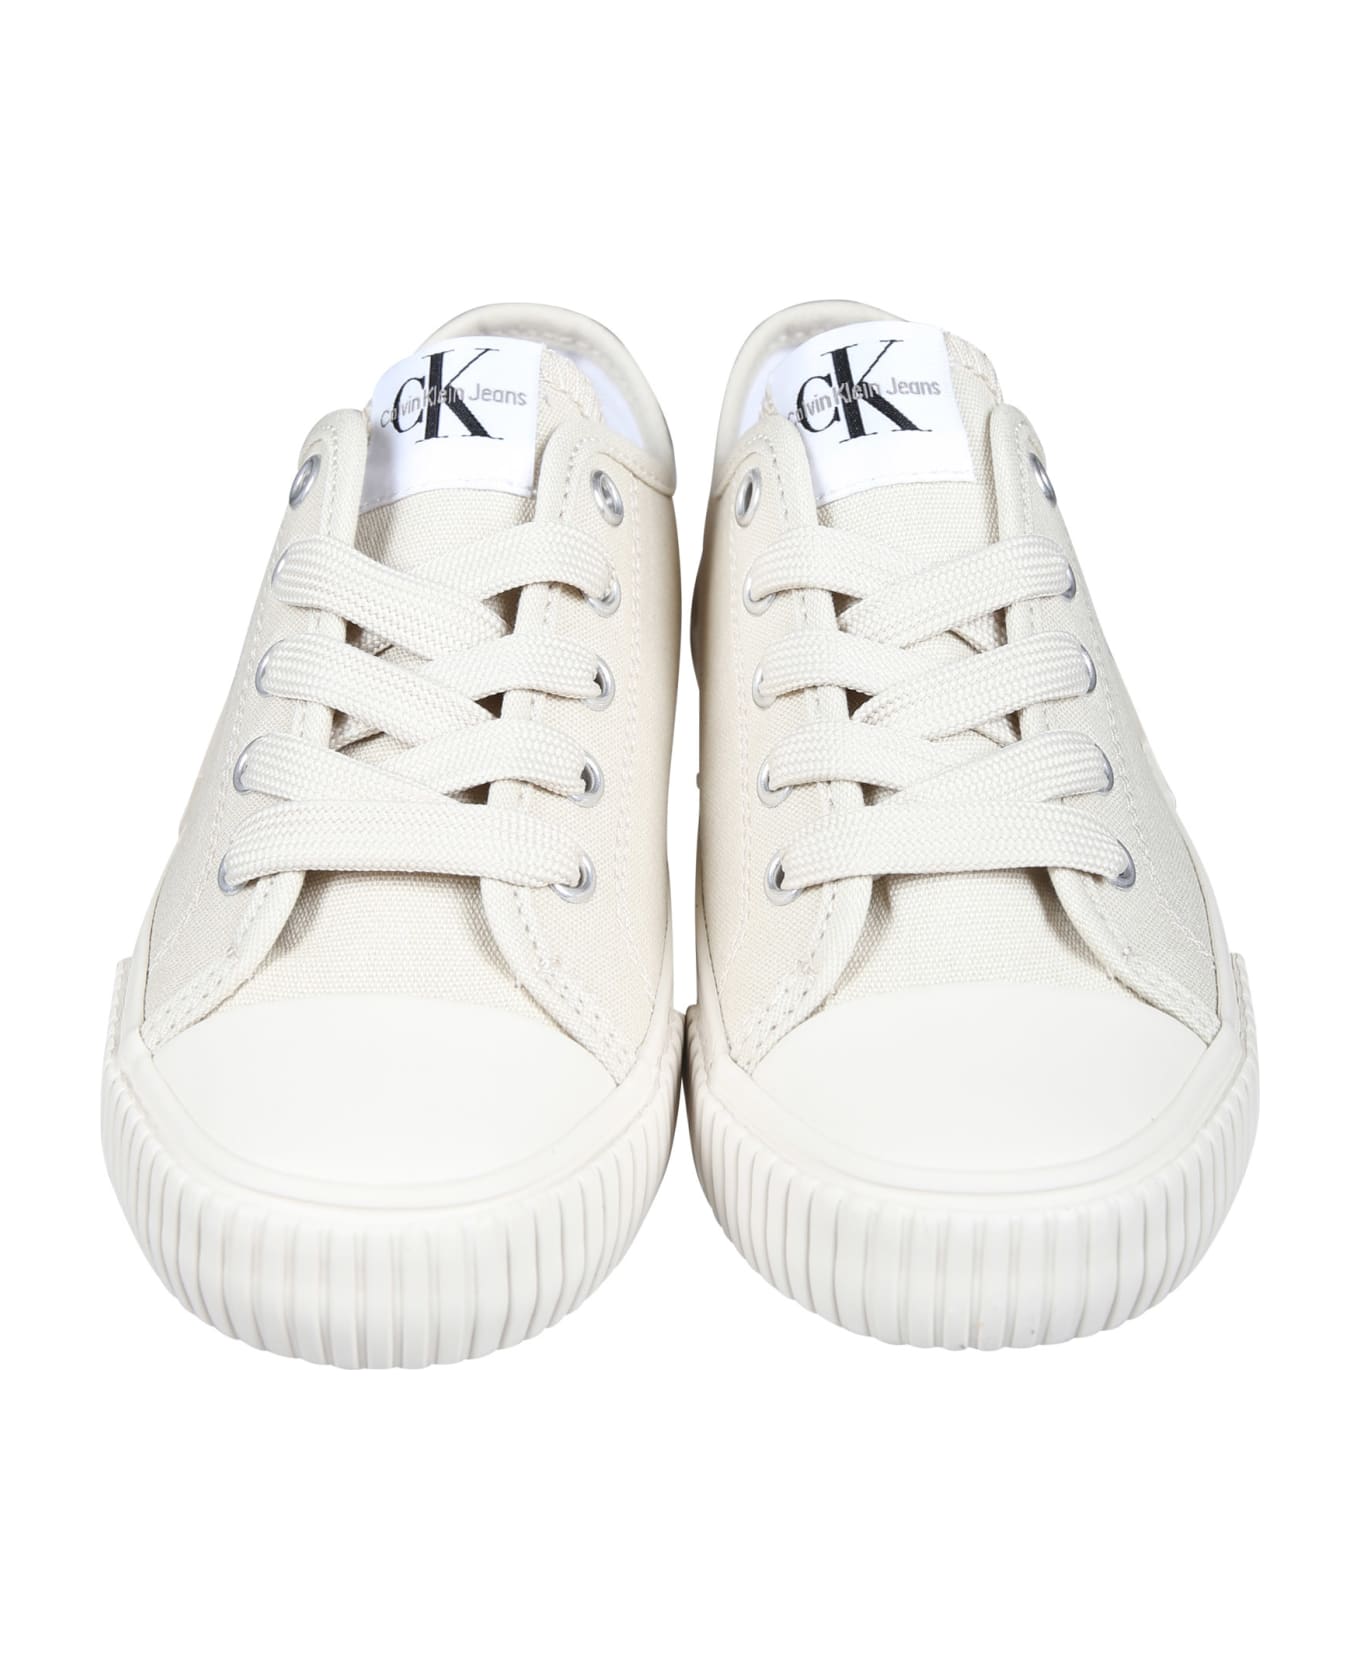 Calvin Klein Ivory Sneakers For Kids With Logo - Ivory シューズ